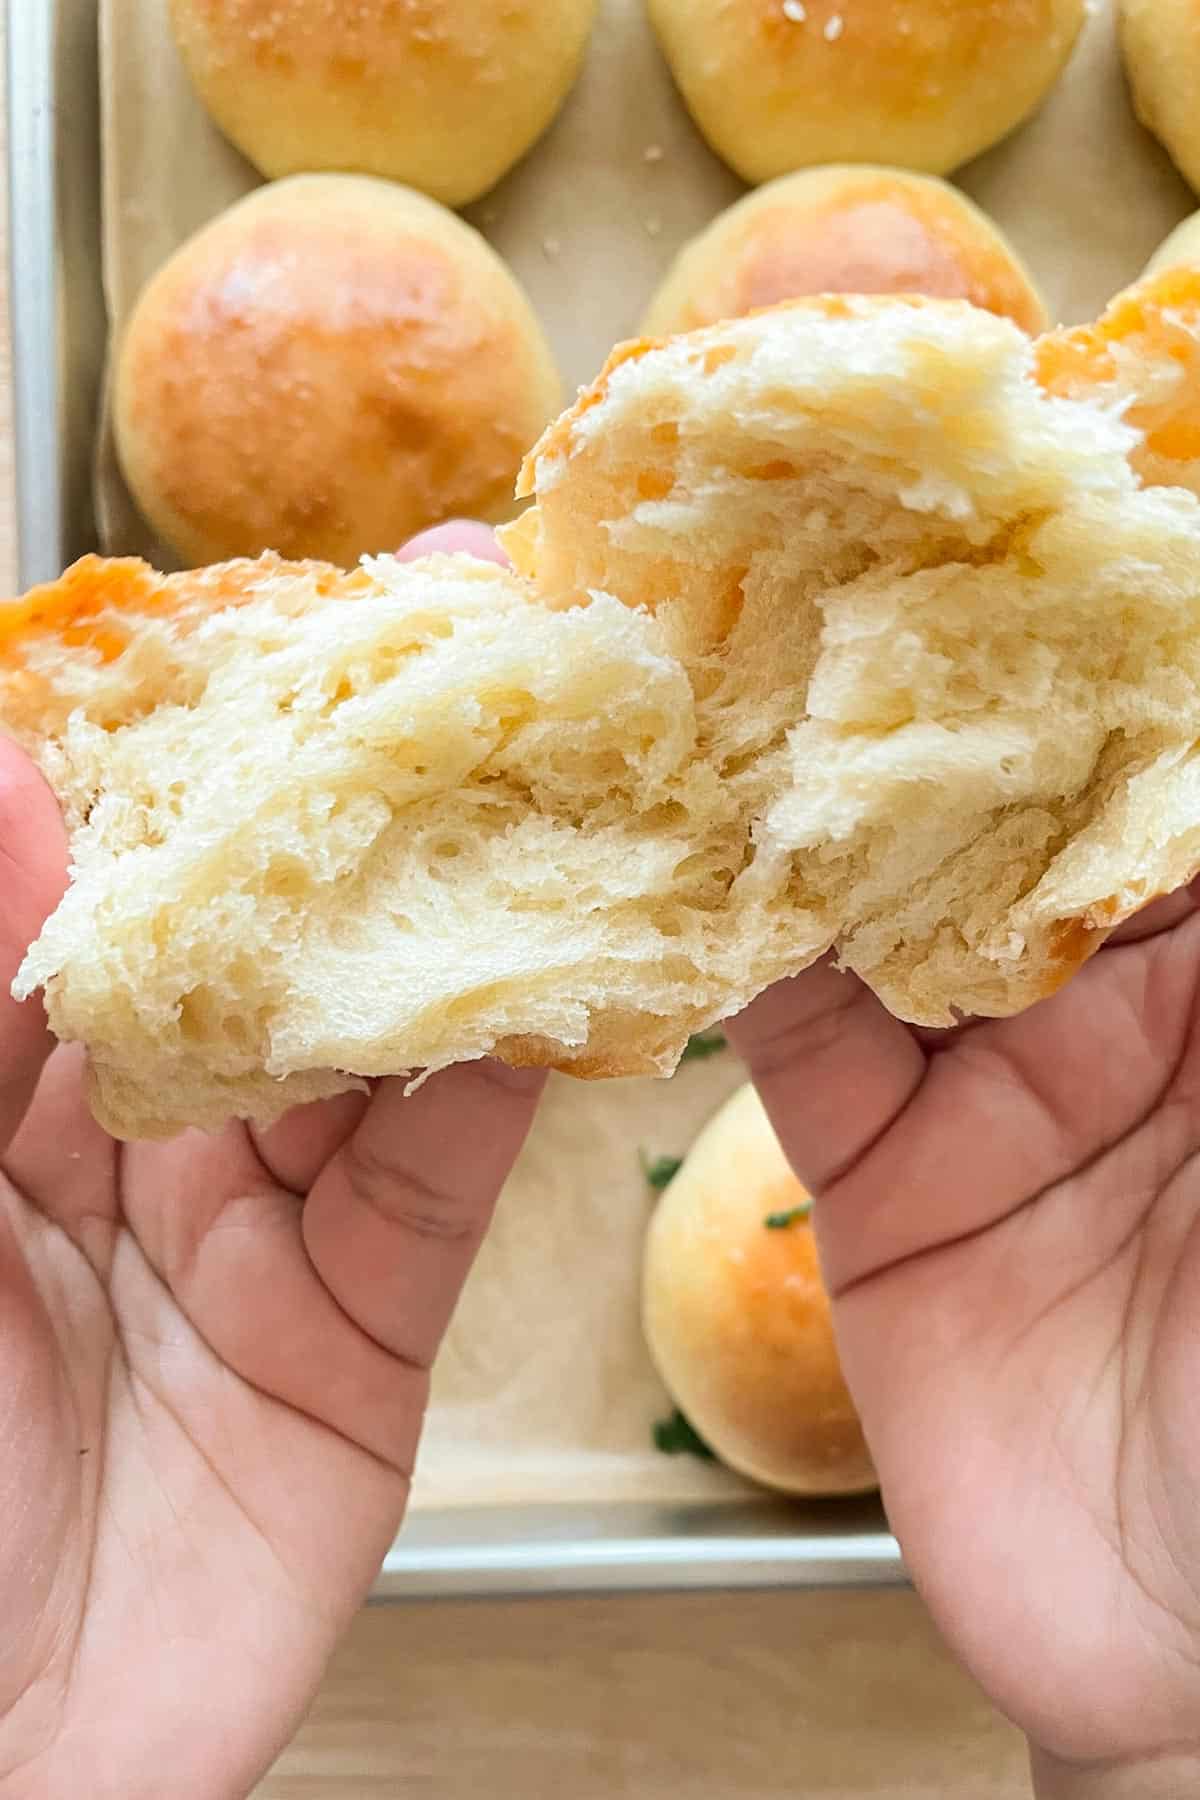 two hands opening a freshly backed potato bread roll with a tray full of rolls in the background.